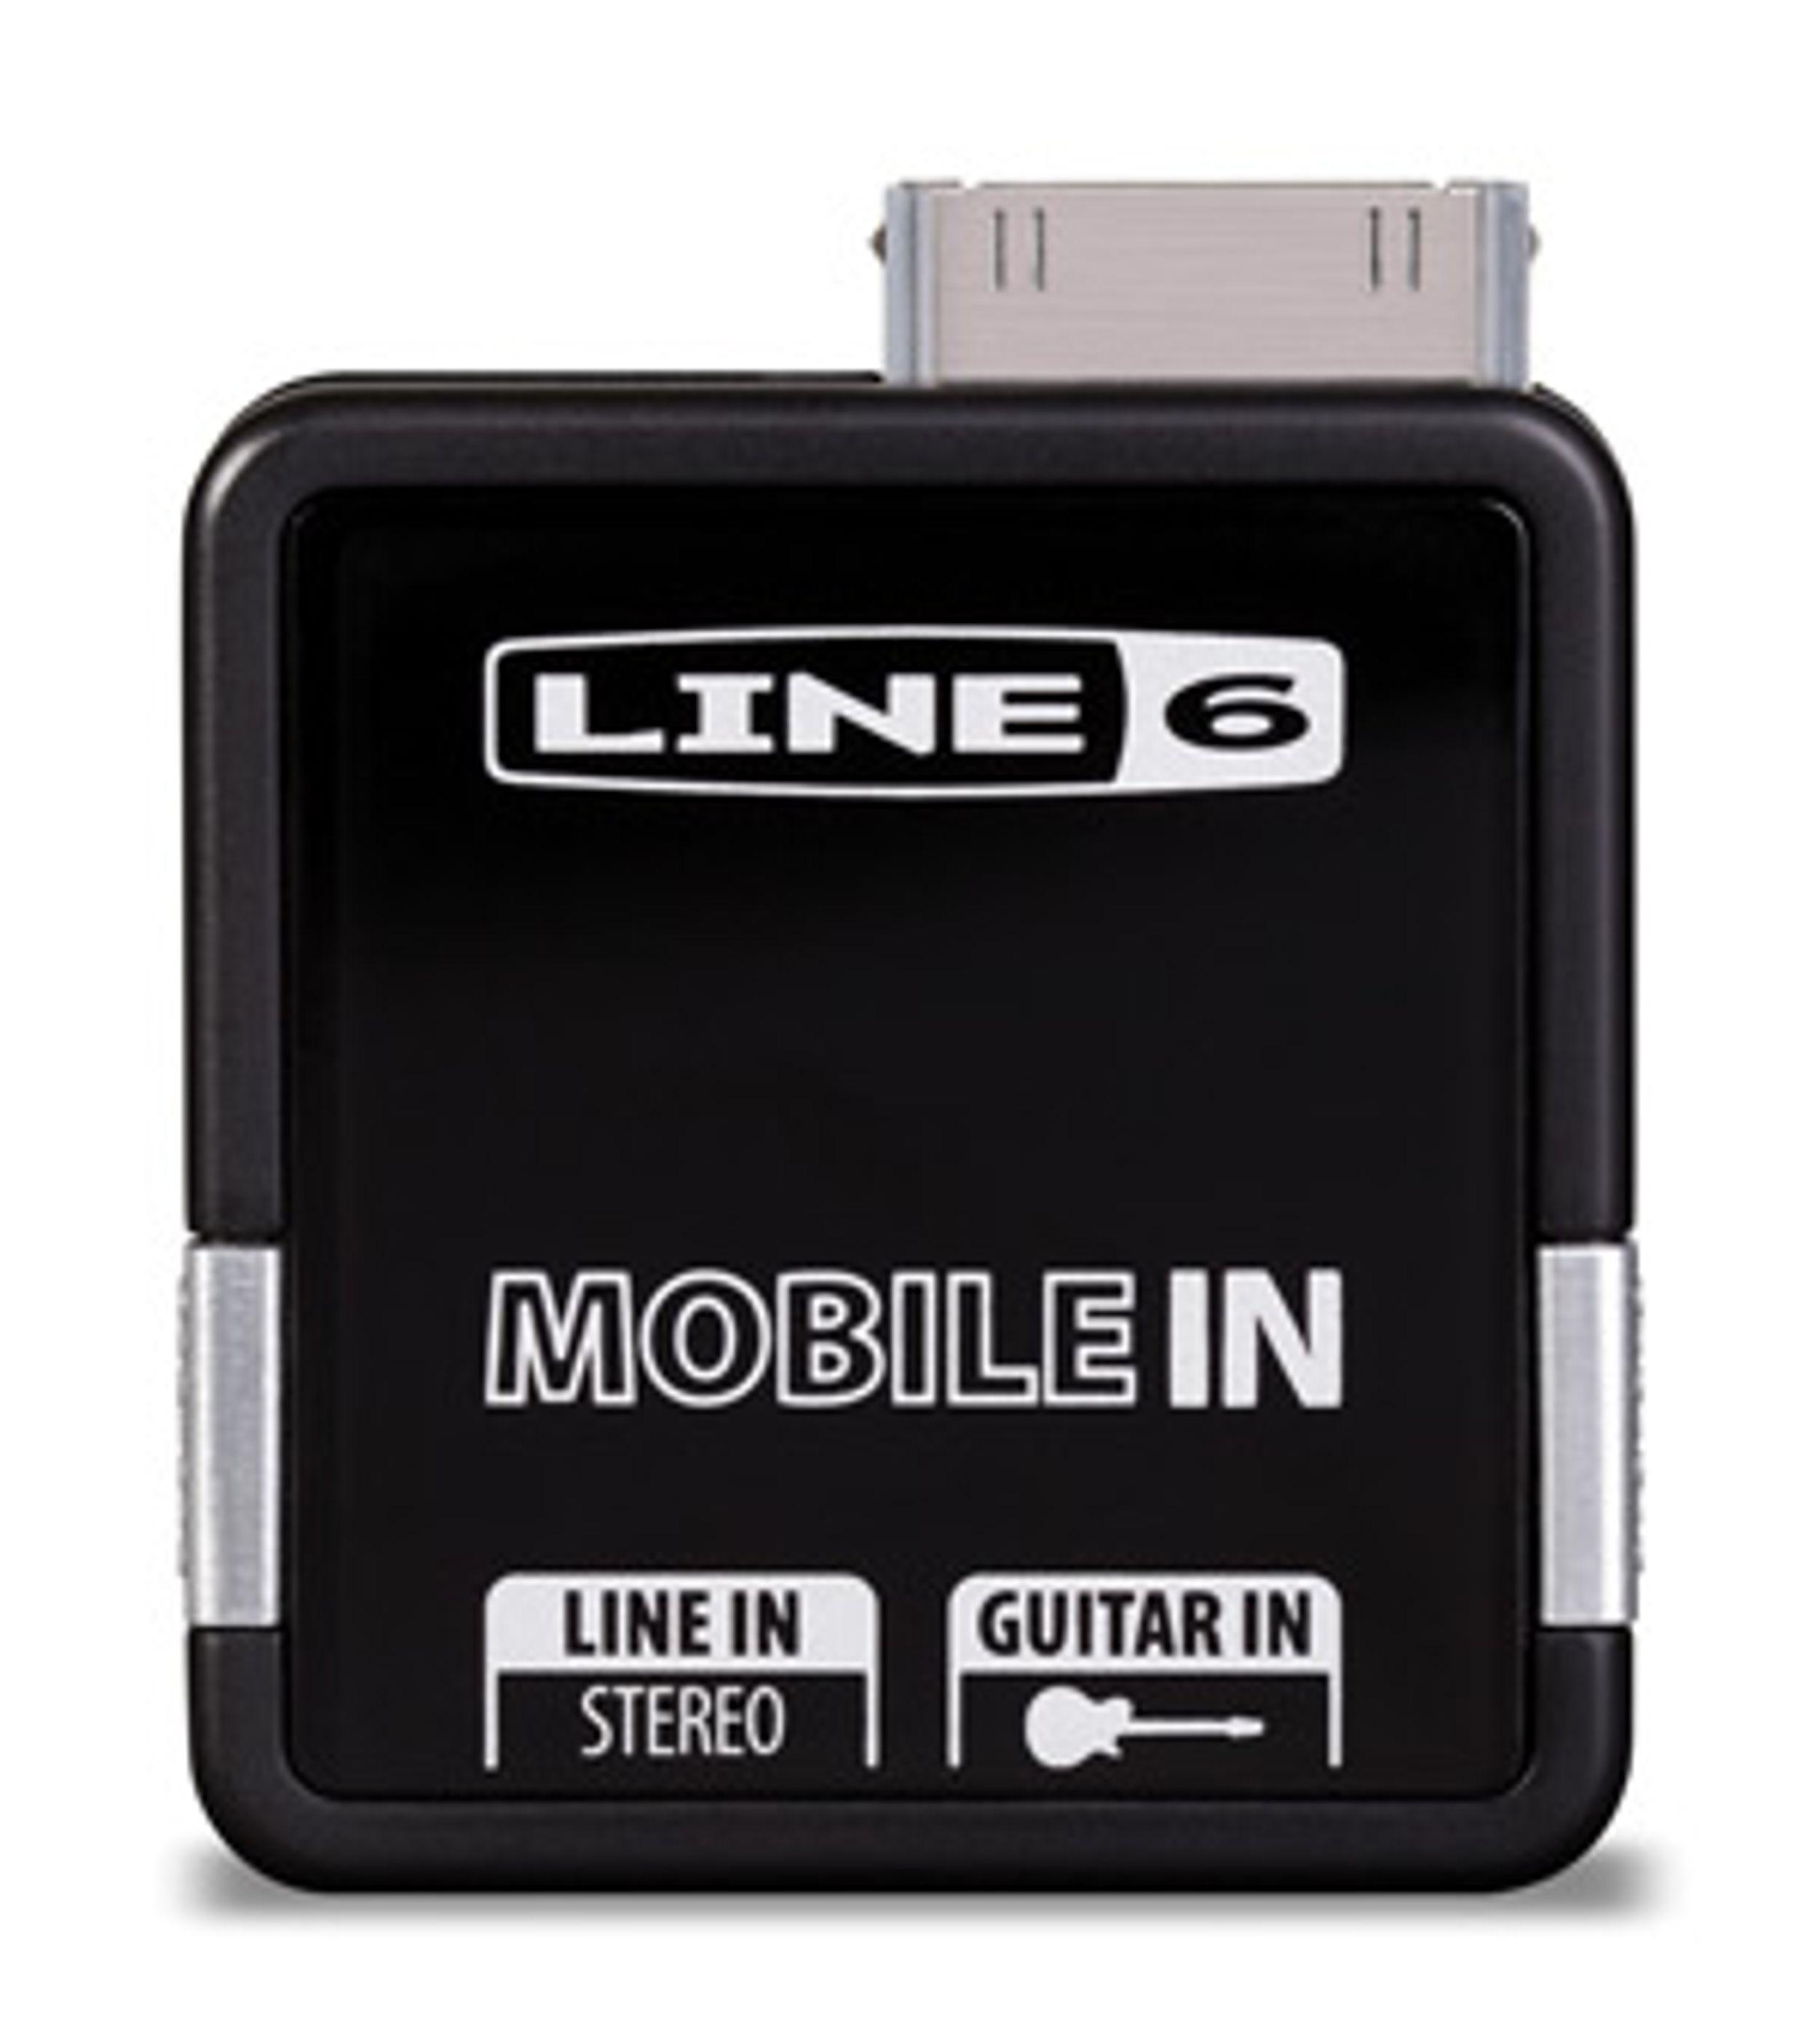 Line 6 Announces Mobile In Digital Input Adaptor and Mobile POD App